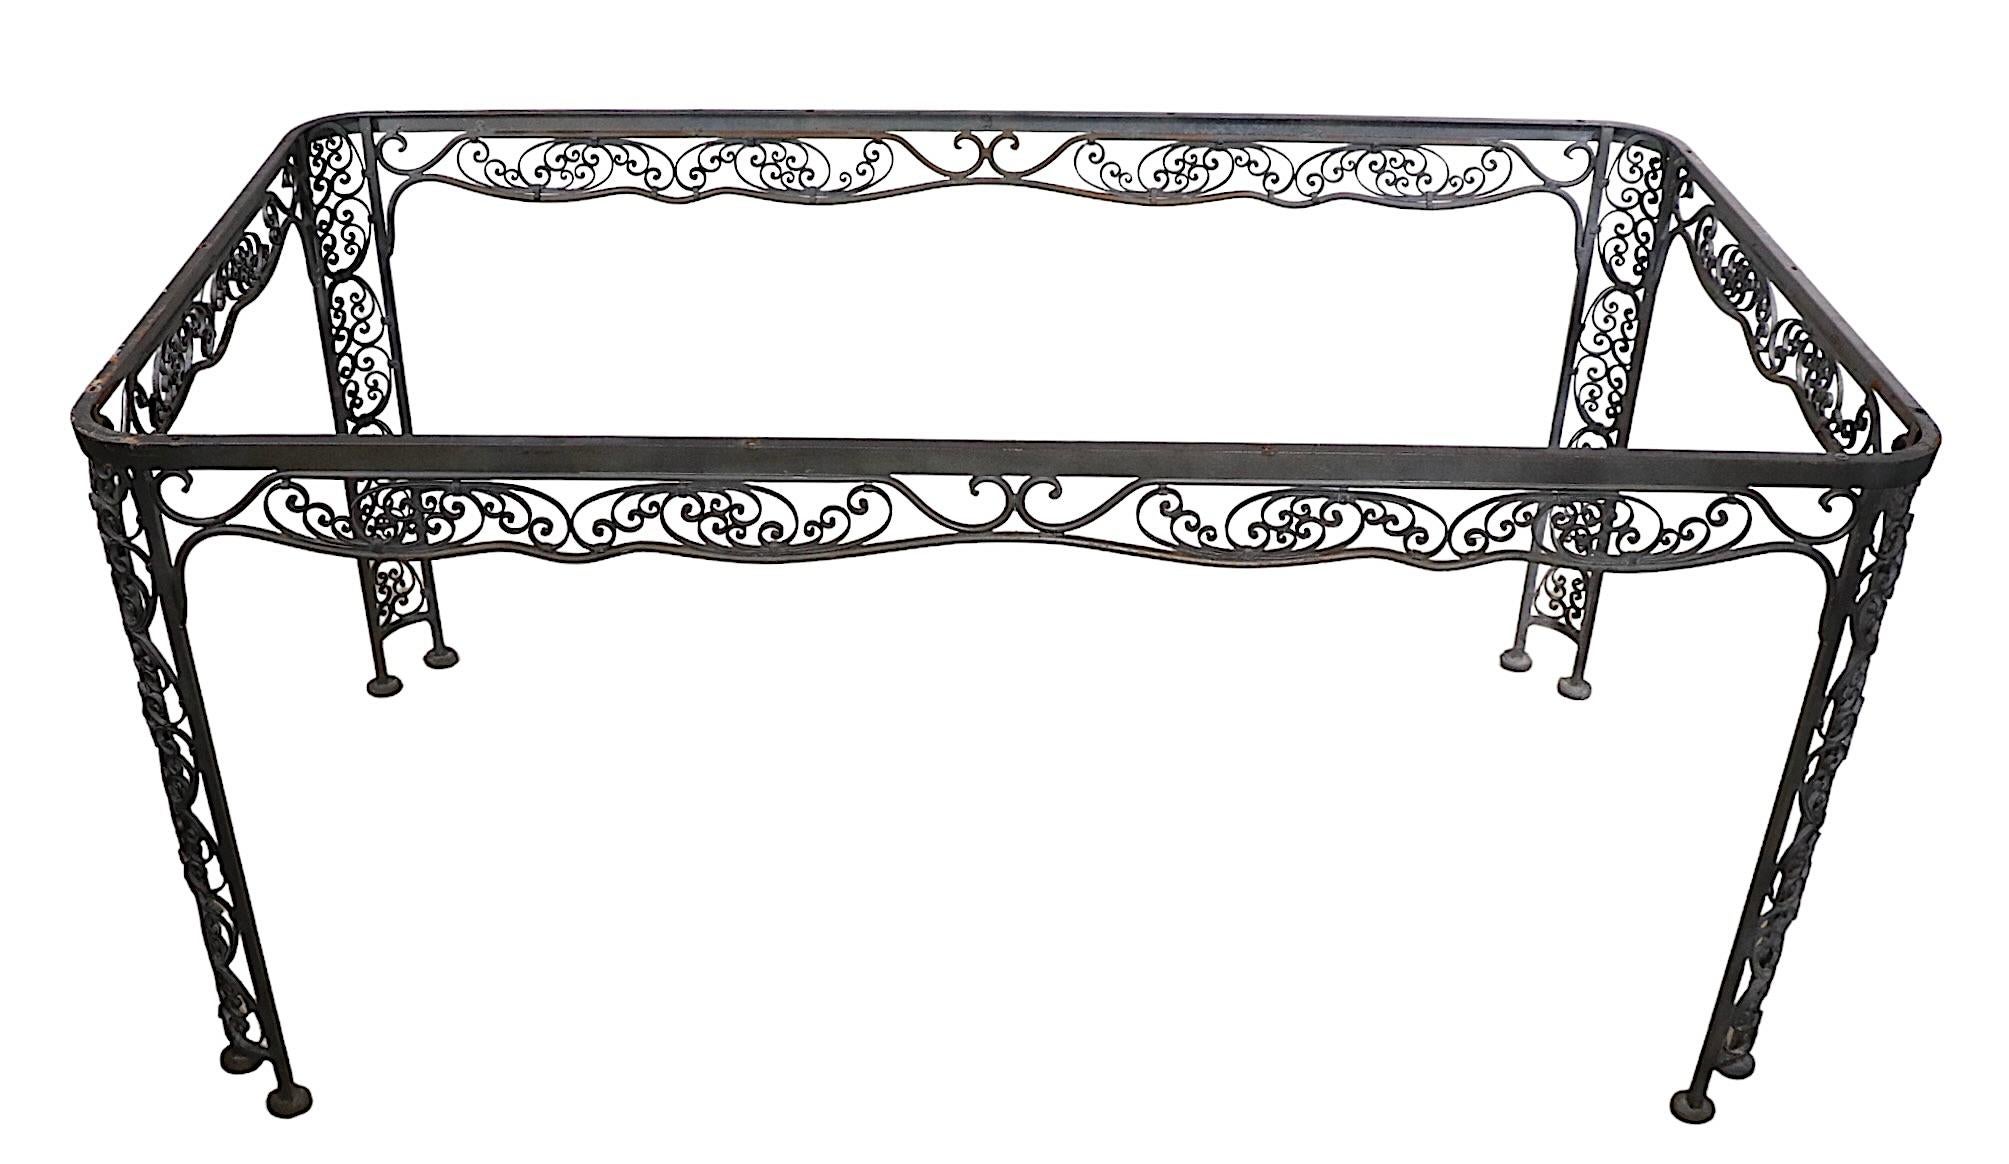 Ornate Wrought Iron Garden Patio Poolside Dining Table by Lee Woodard, c 1940's For Sale 7